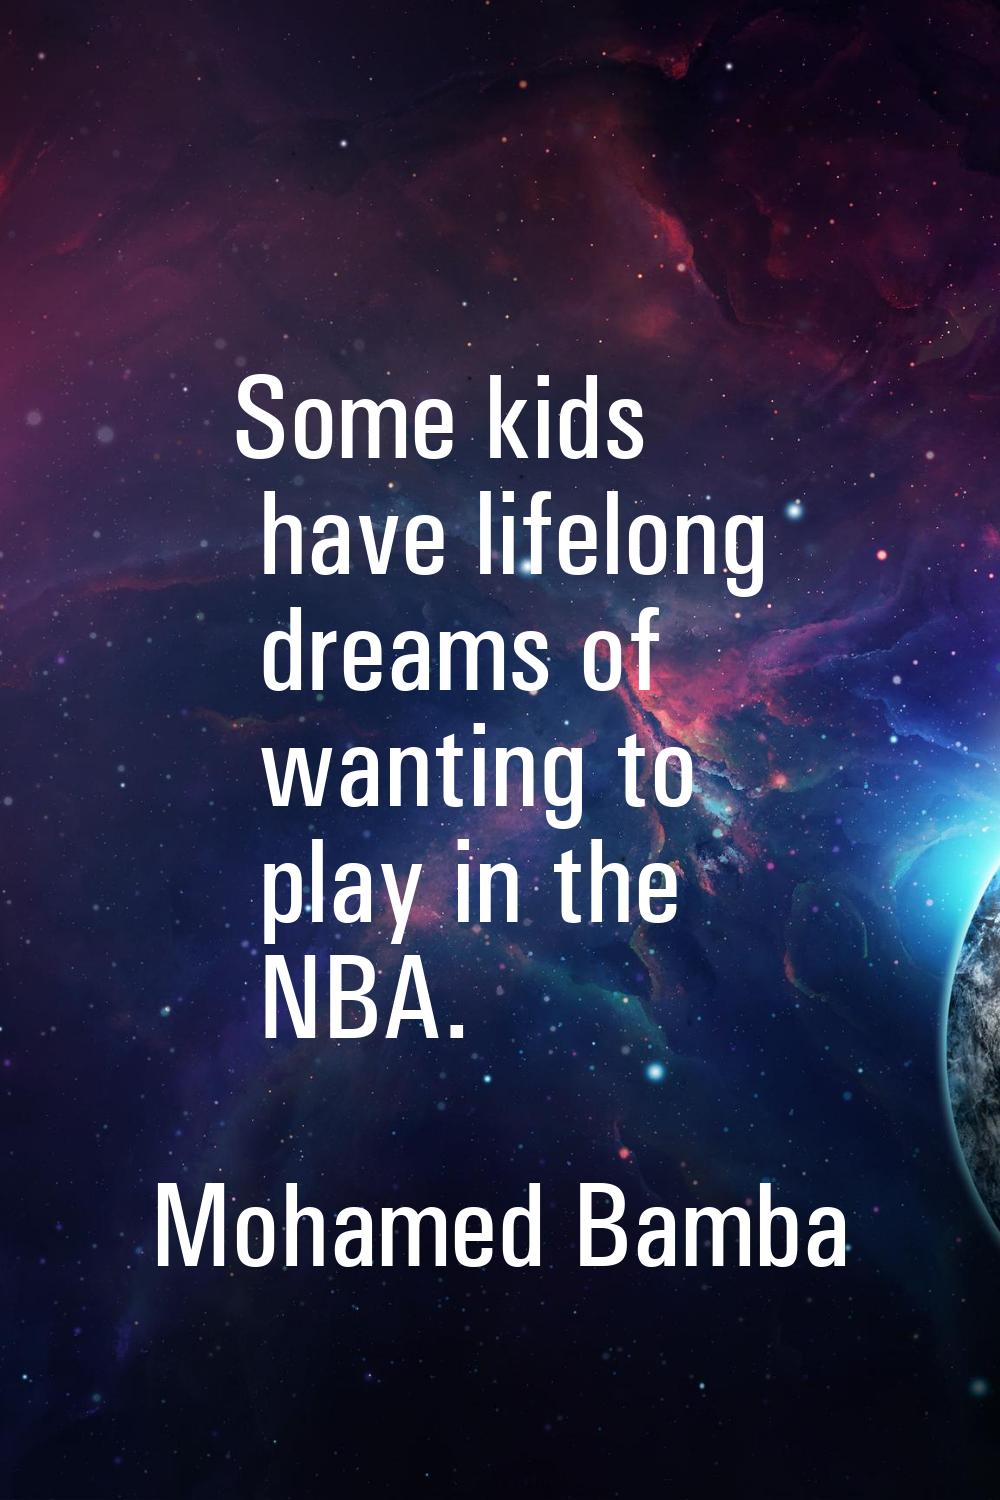 Some kids have lifelong dreams of wanting to play in the NBA.